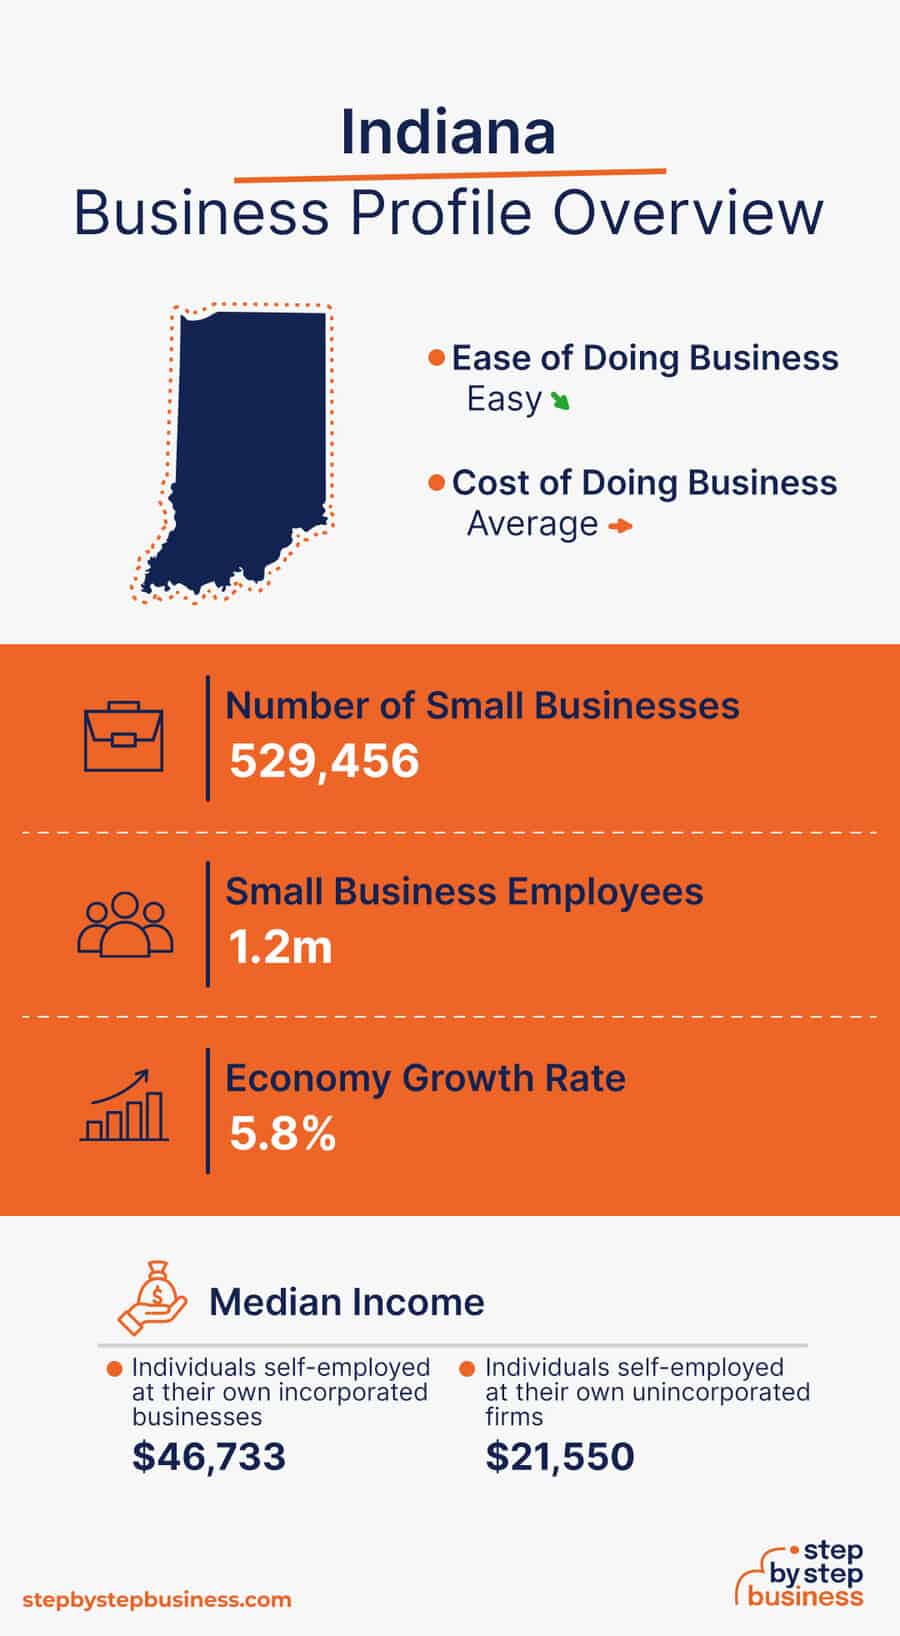 Indiana Business Profile Overview